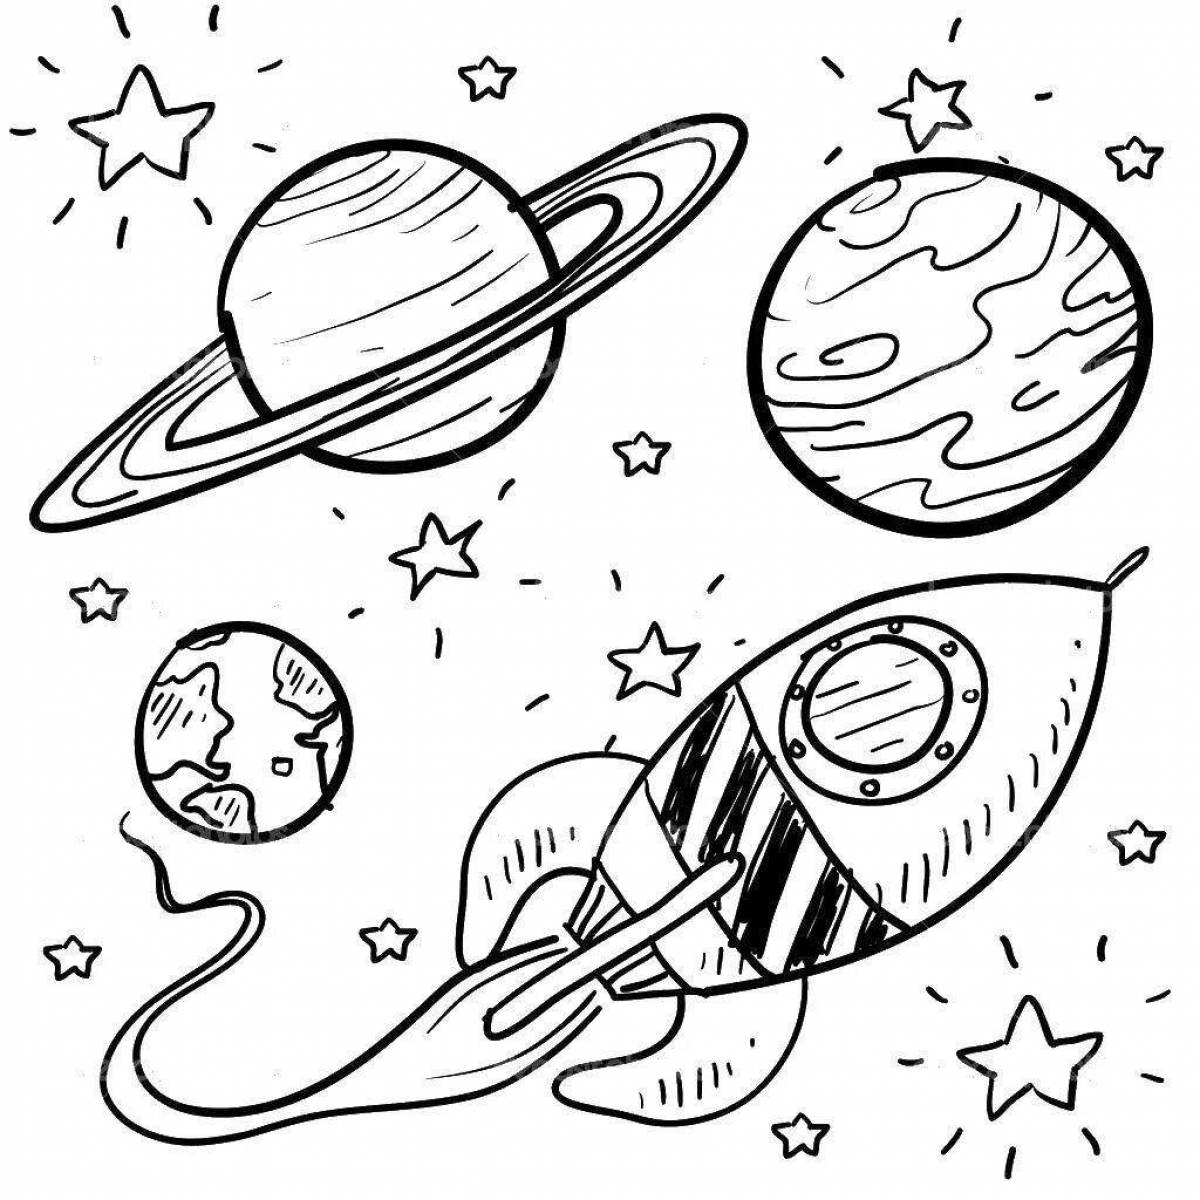 Great coloring of all the planets